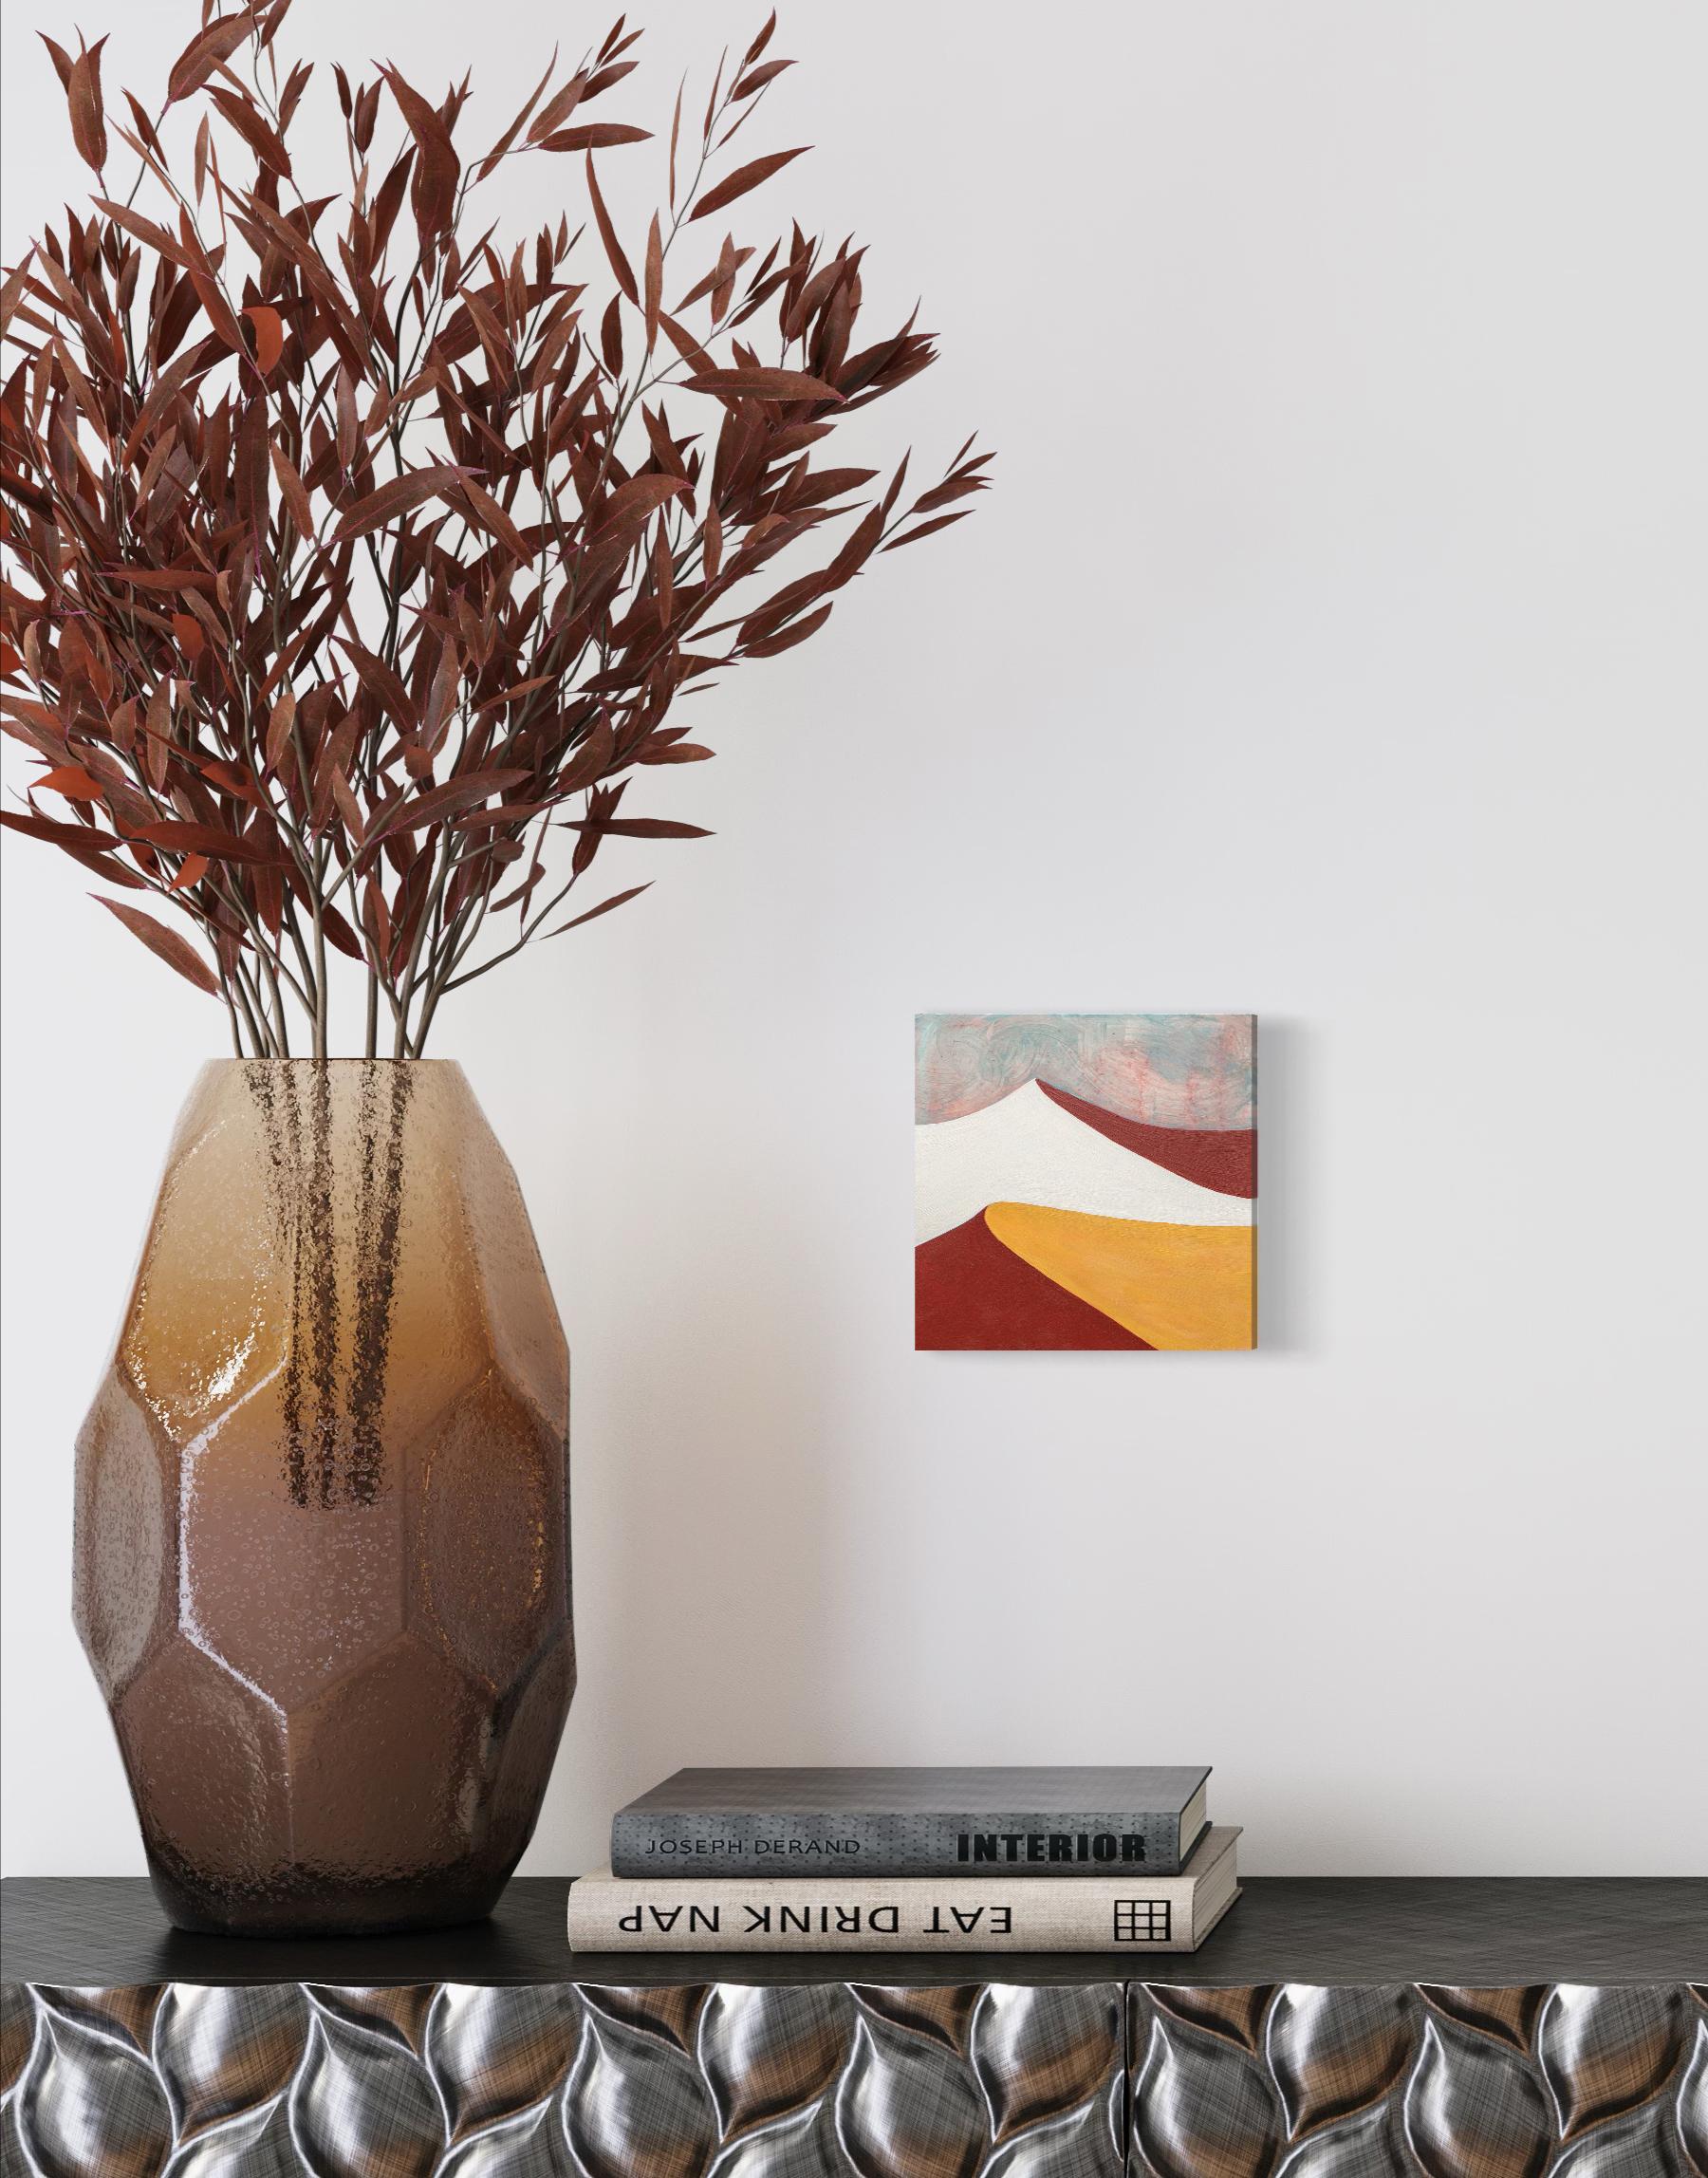 This abstract desert landscape painting by Alina B is made with acrylic paint on board. It features a warm palette with golden yellow and deep red tones, contrasted by white and light teal. The sky is made with light washy layers and a warm